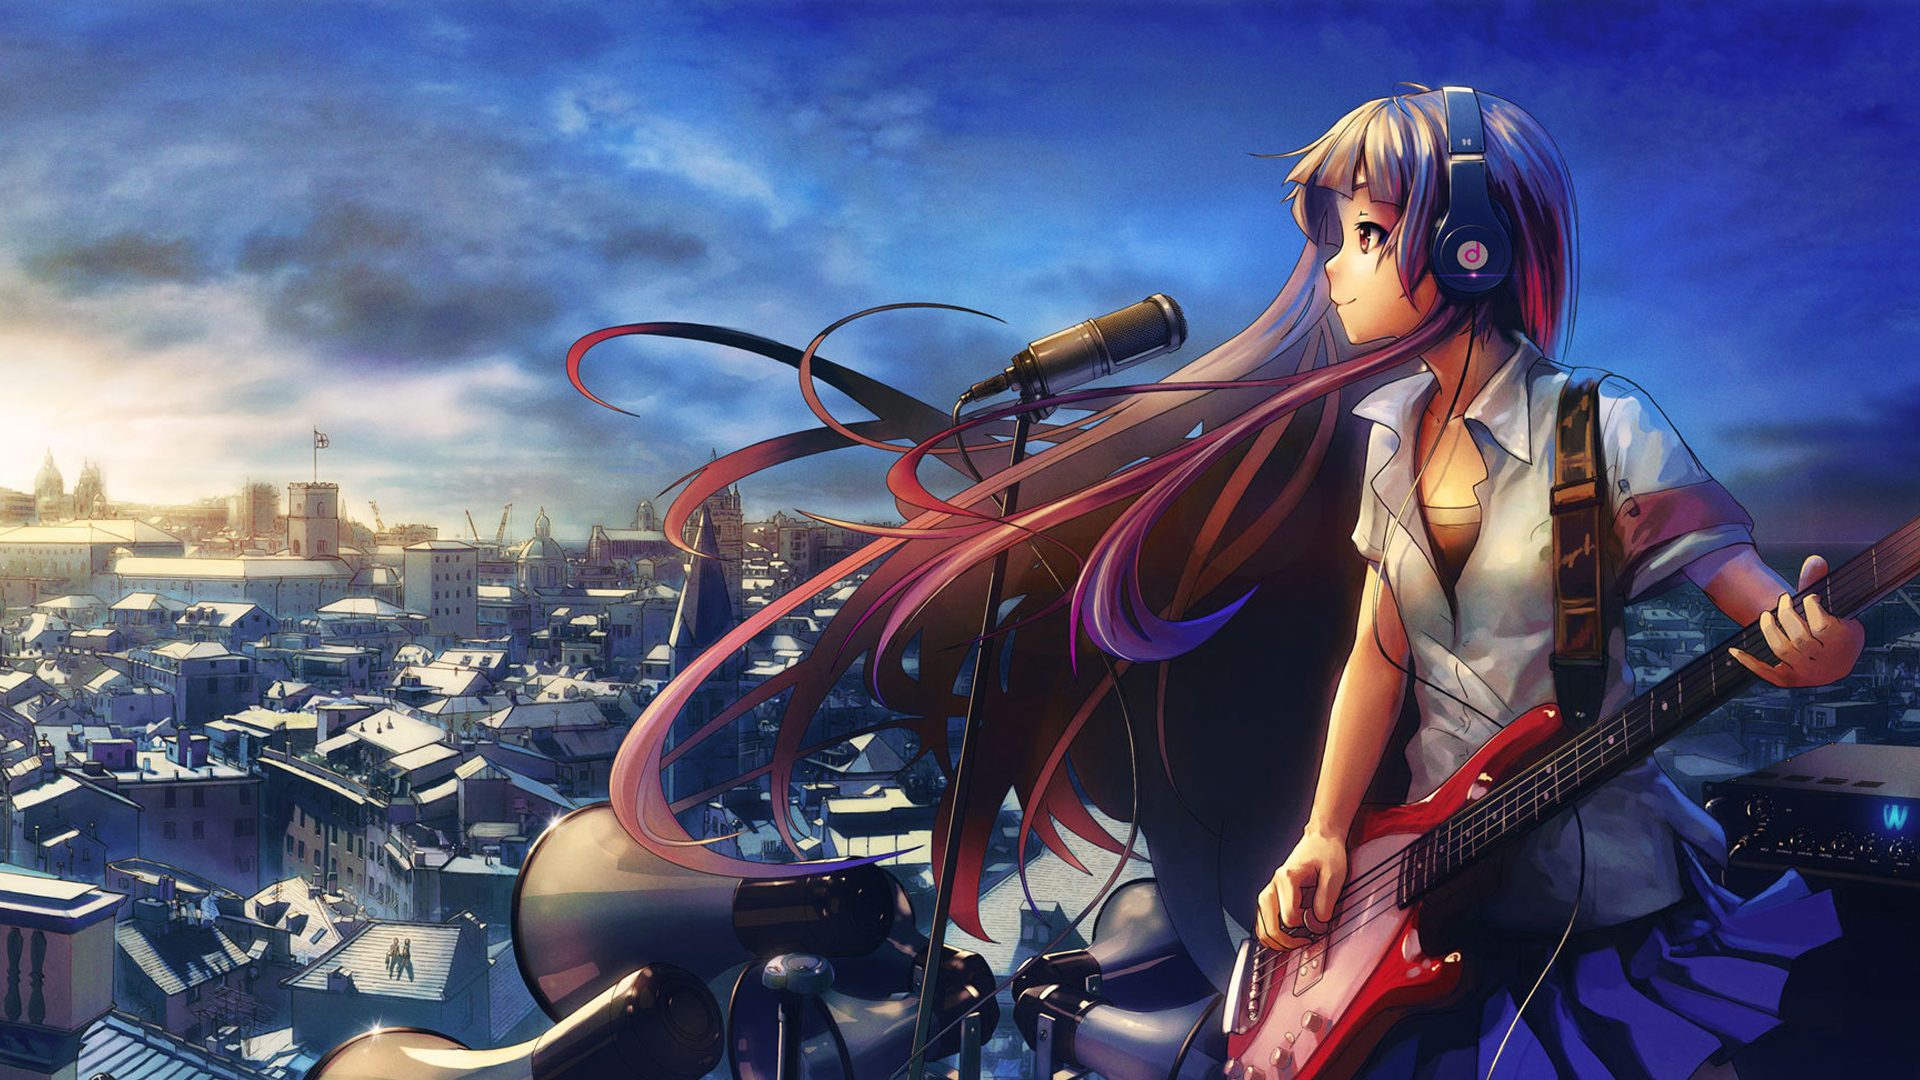 Anime Full HD Wallpapers download 1080p desktop backgrounds 1920x1080